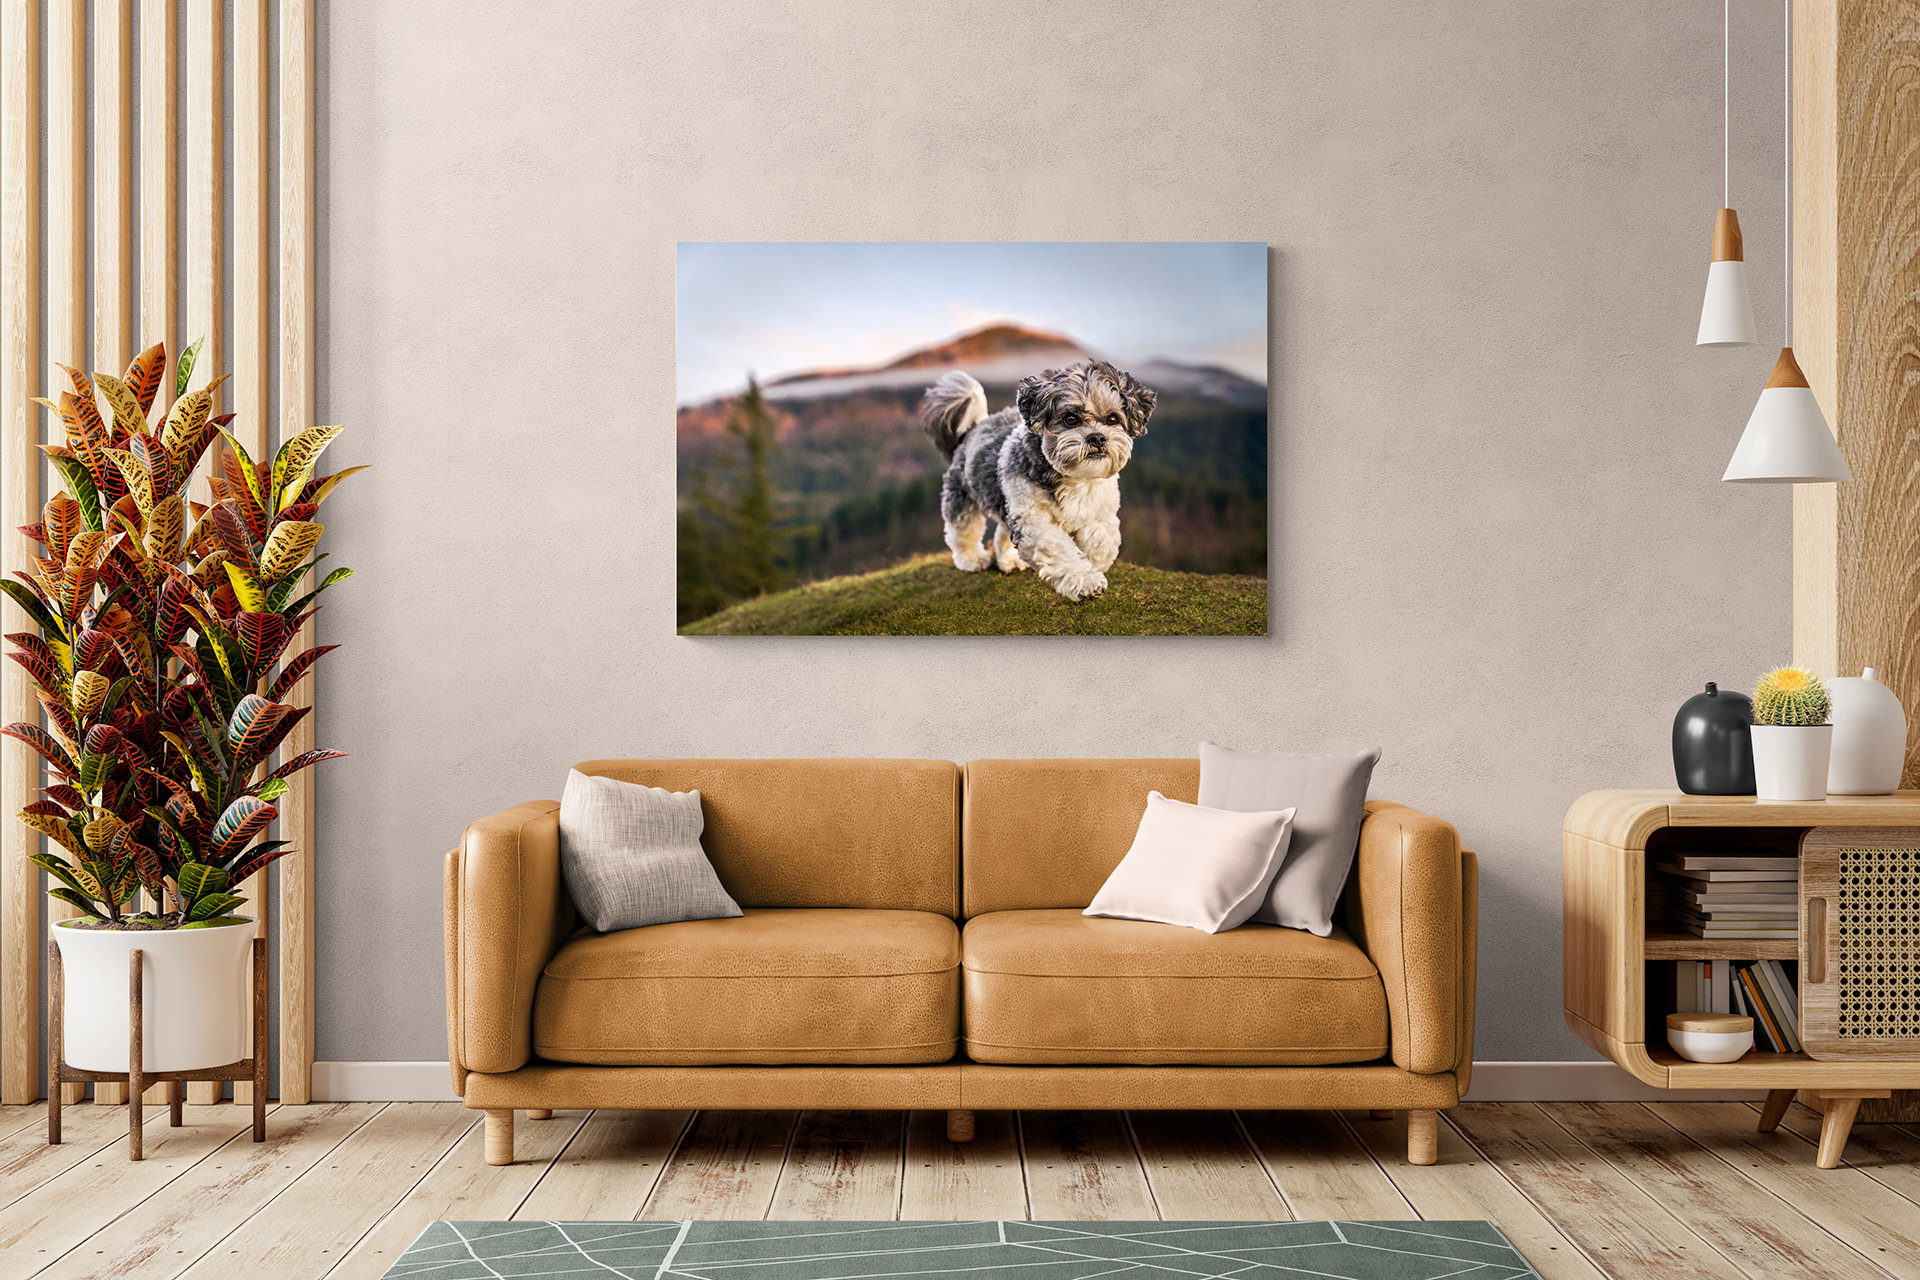 Dog running in mountains, canvas art in living room decor.